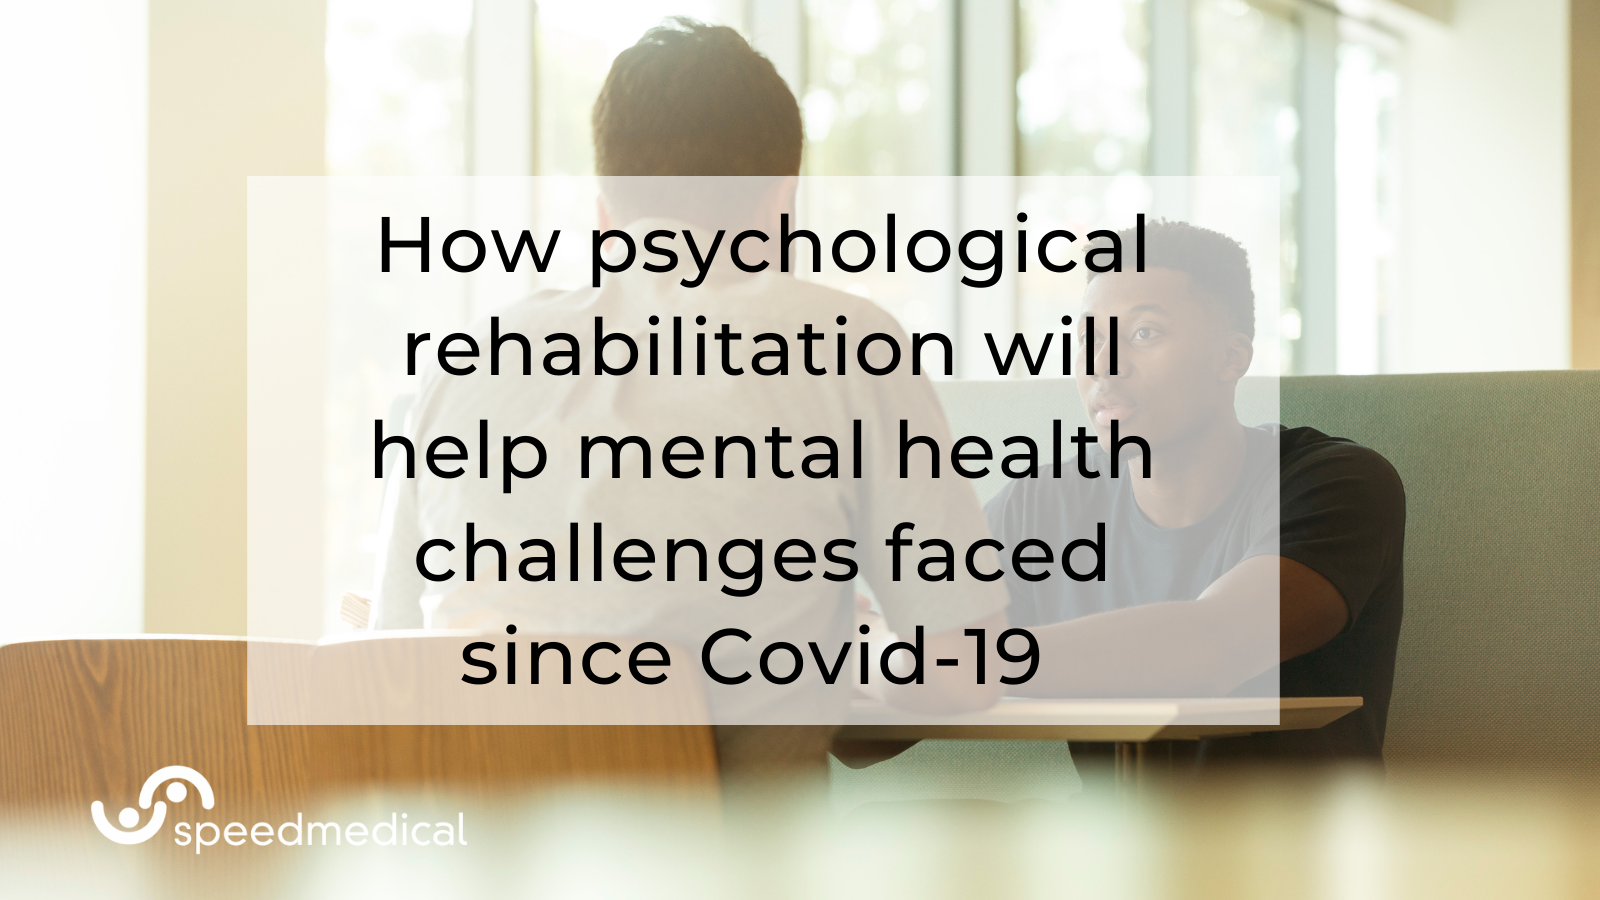 How psychological rehabilitation will help mental health challenges faced since Covid-19